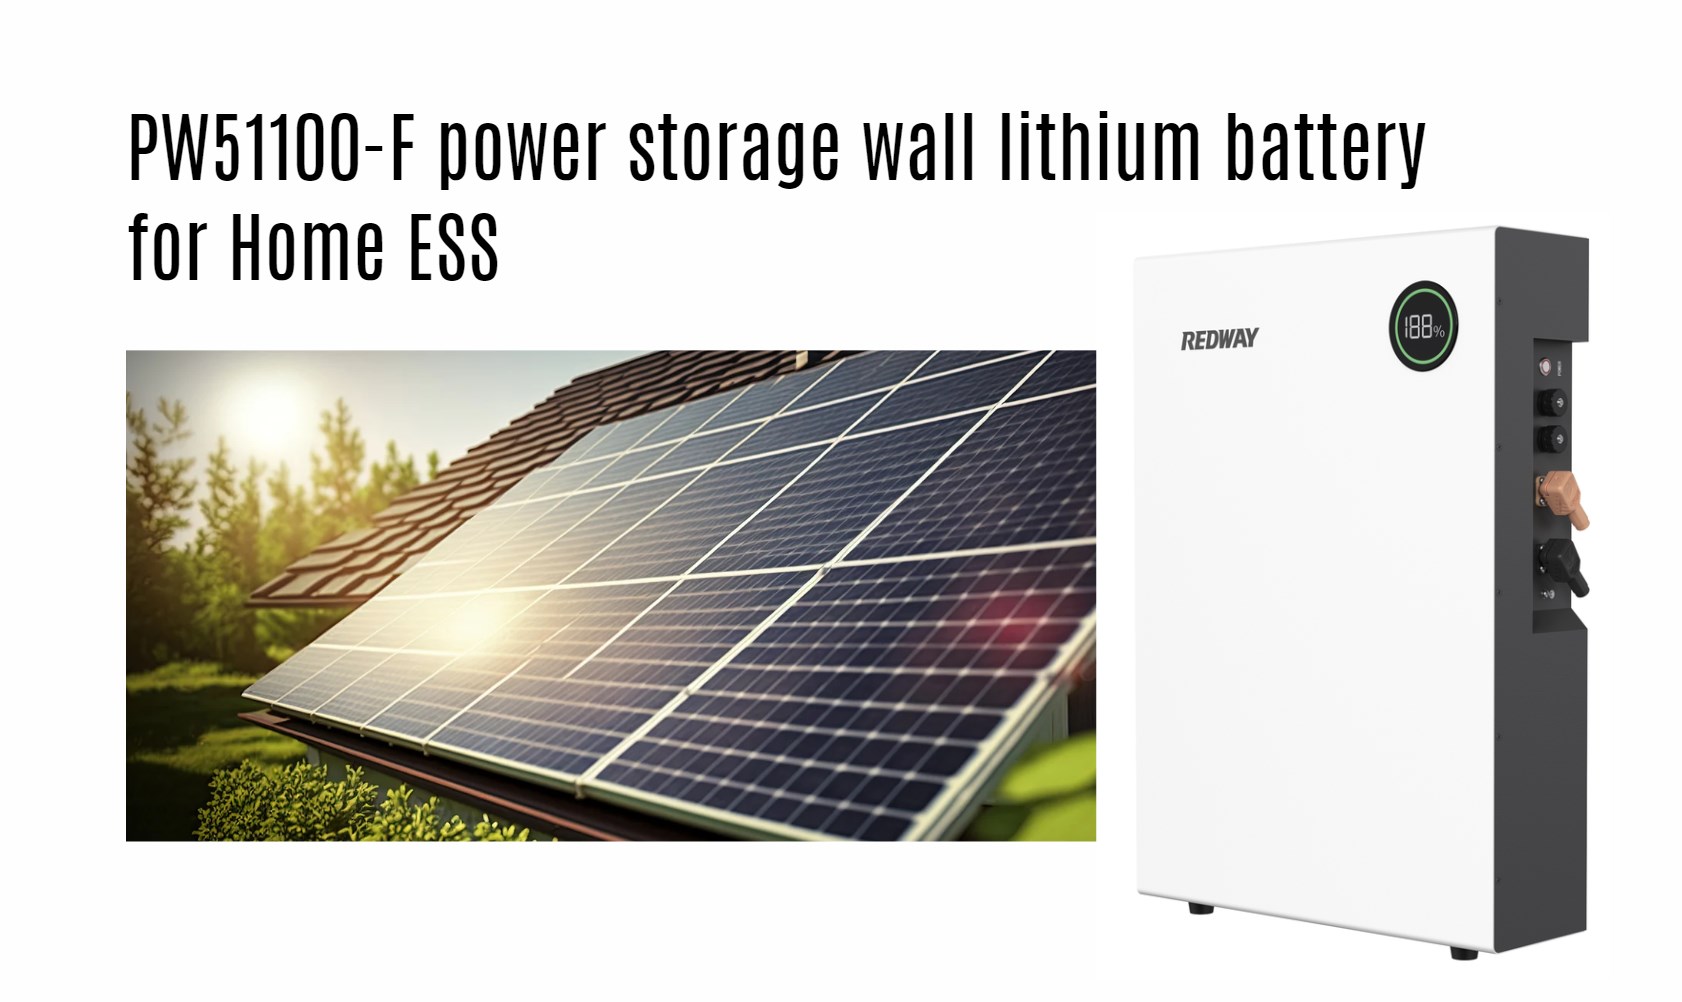 PW51100-F power storage wall lithium battery for Home ESS